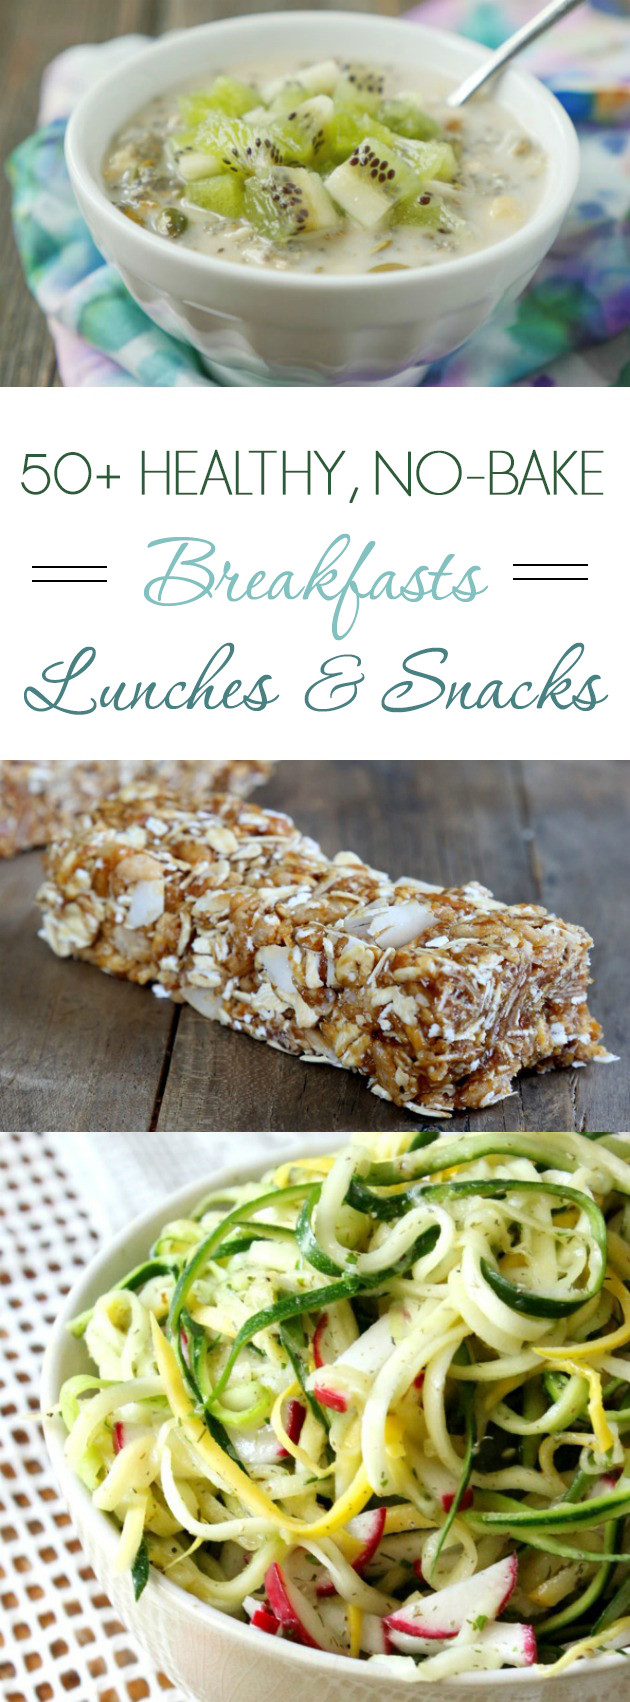 Healthy No Cook Lunches
 Over 50 Healthy No Bake Breakfasts Lunches and Snacks